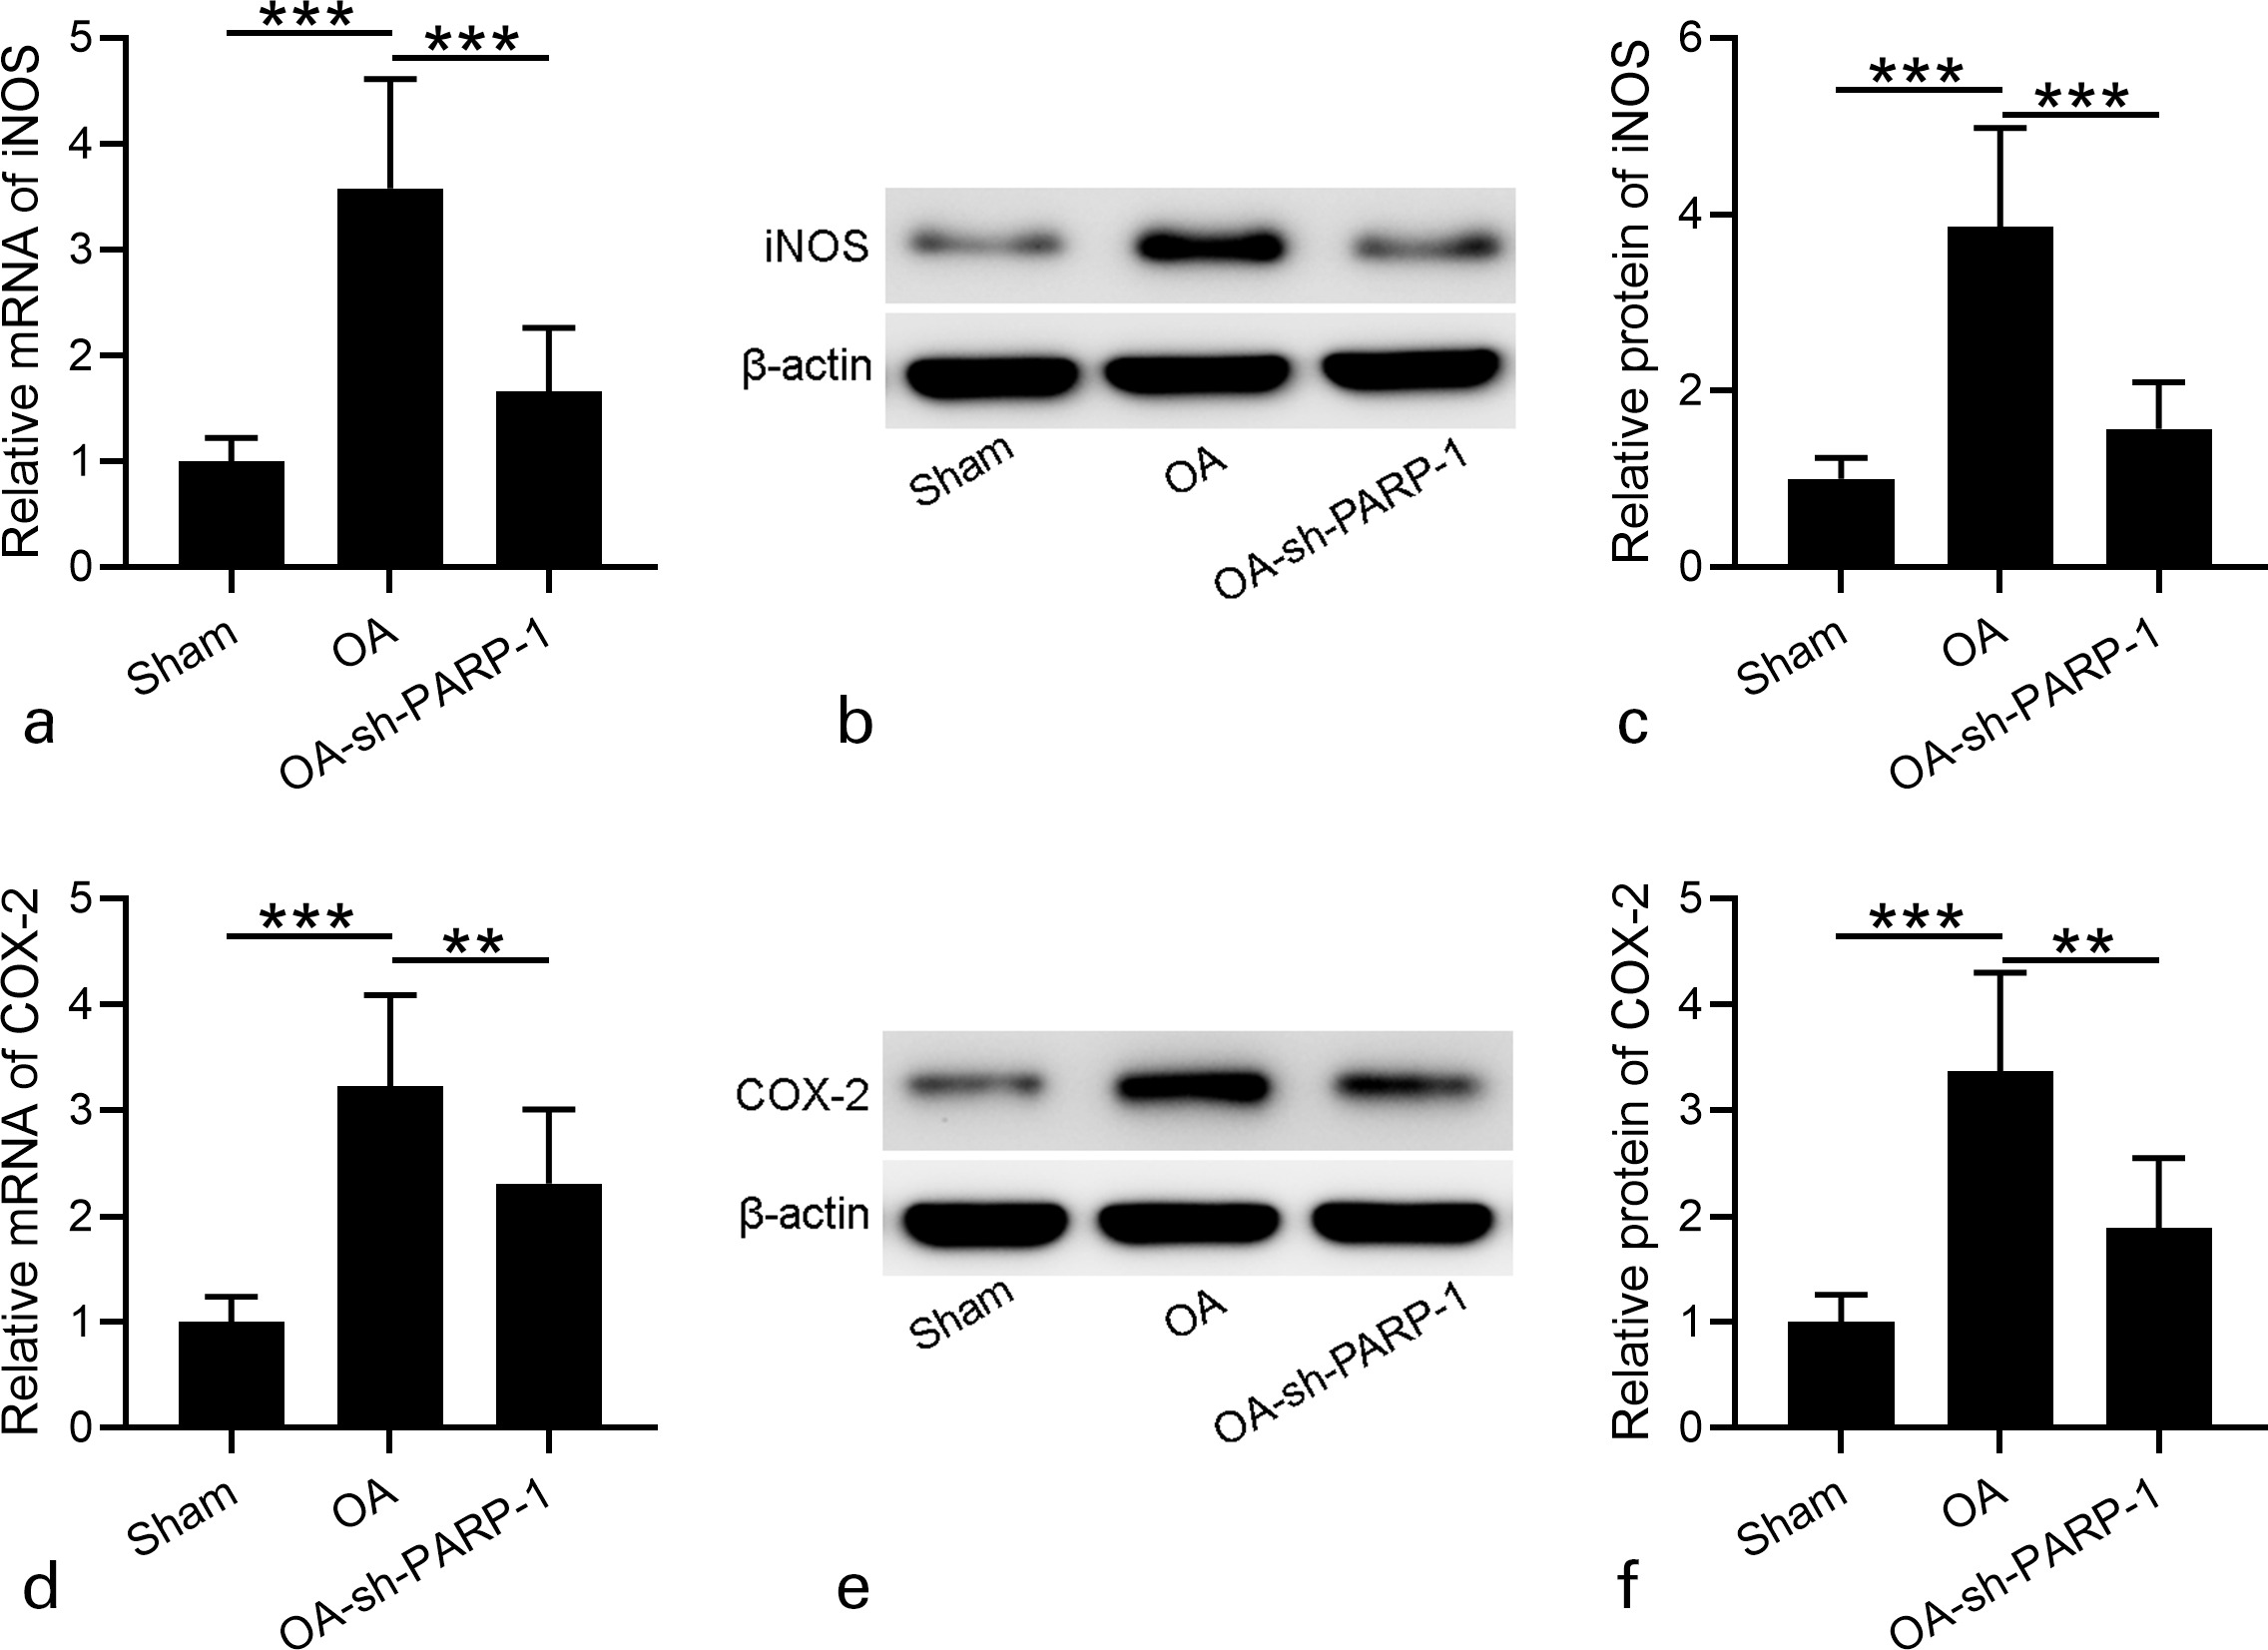 Fig. 6 
            Effects of intra-articular injection of poly (ADP-ribose) polymerase 1 (PARP-1) shRNA (short hairpin (sh)-PARP-1) on the expression of inducible nitric oxide synthase (iNOS) and cyclooxygenase-2 (COX-2) in cartilage of rats 12 weeks after anterior cruciate ligament transection (ACLT) plus medial meniscus removal (MMx). a) and d) Real-time quantitative reverse transcription polymerase chain reaction (RT-qPCR) was used to analyze the messenger RNA (mRNA) expression levels of iNOS and COX-2 in cartilage. b) and e) Western blotting was used to assay the protein expression of iNOS and COX-2 in the cartilage. c) and f) Relative expression levels of iNOS and COX-2 are shown, which were normalized to the corresponding sham. N = 12 in each group. Data are presented as mean (standard deviation (SD)). **p < 0.01, ***p < 0.001 between the indicated groups. One-way analysis of variance (ANOVA) followed by Dunn's multiple comparisons test. OA, osteoarthritis.
          